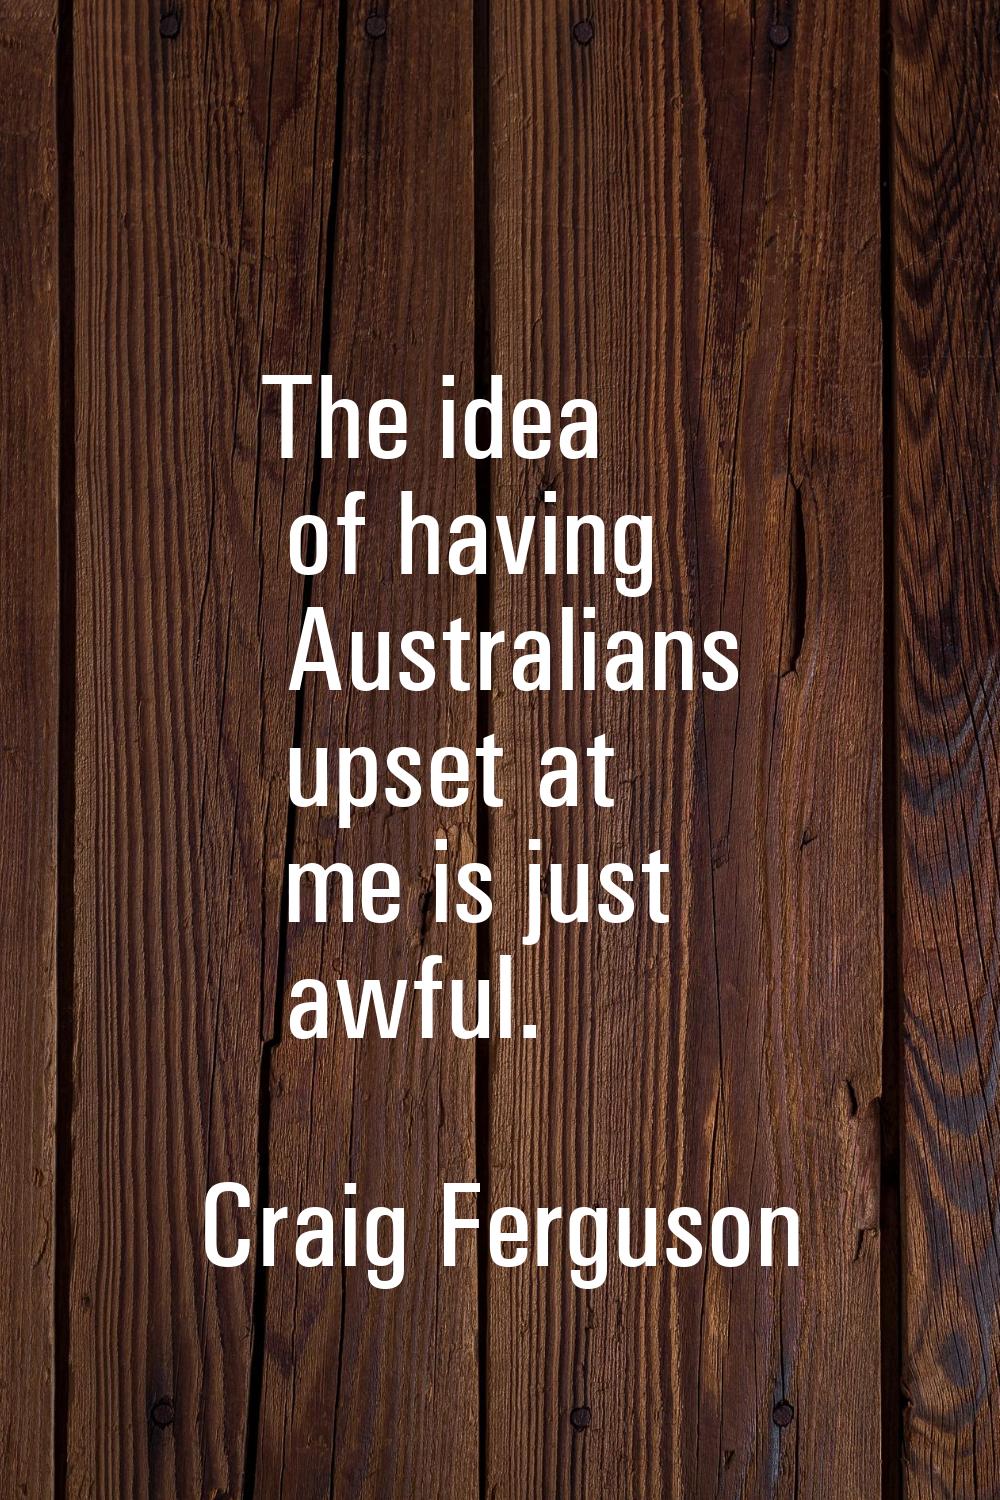 The idea of having Australians upset at me is just awful.